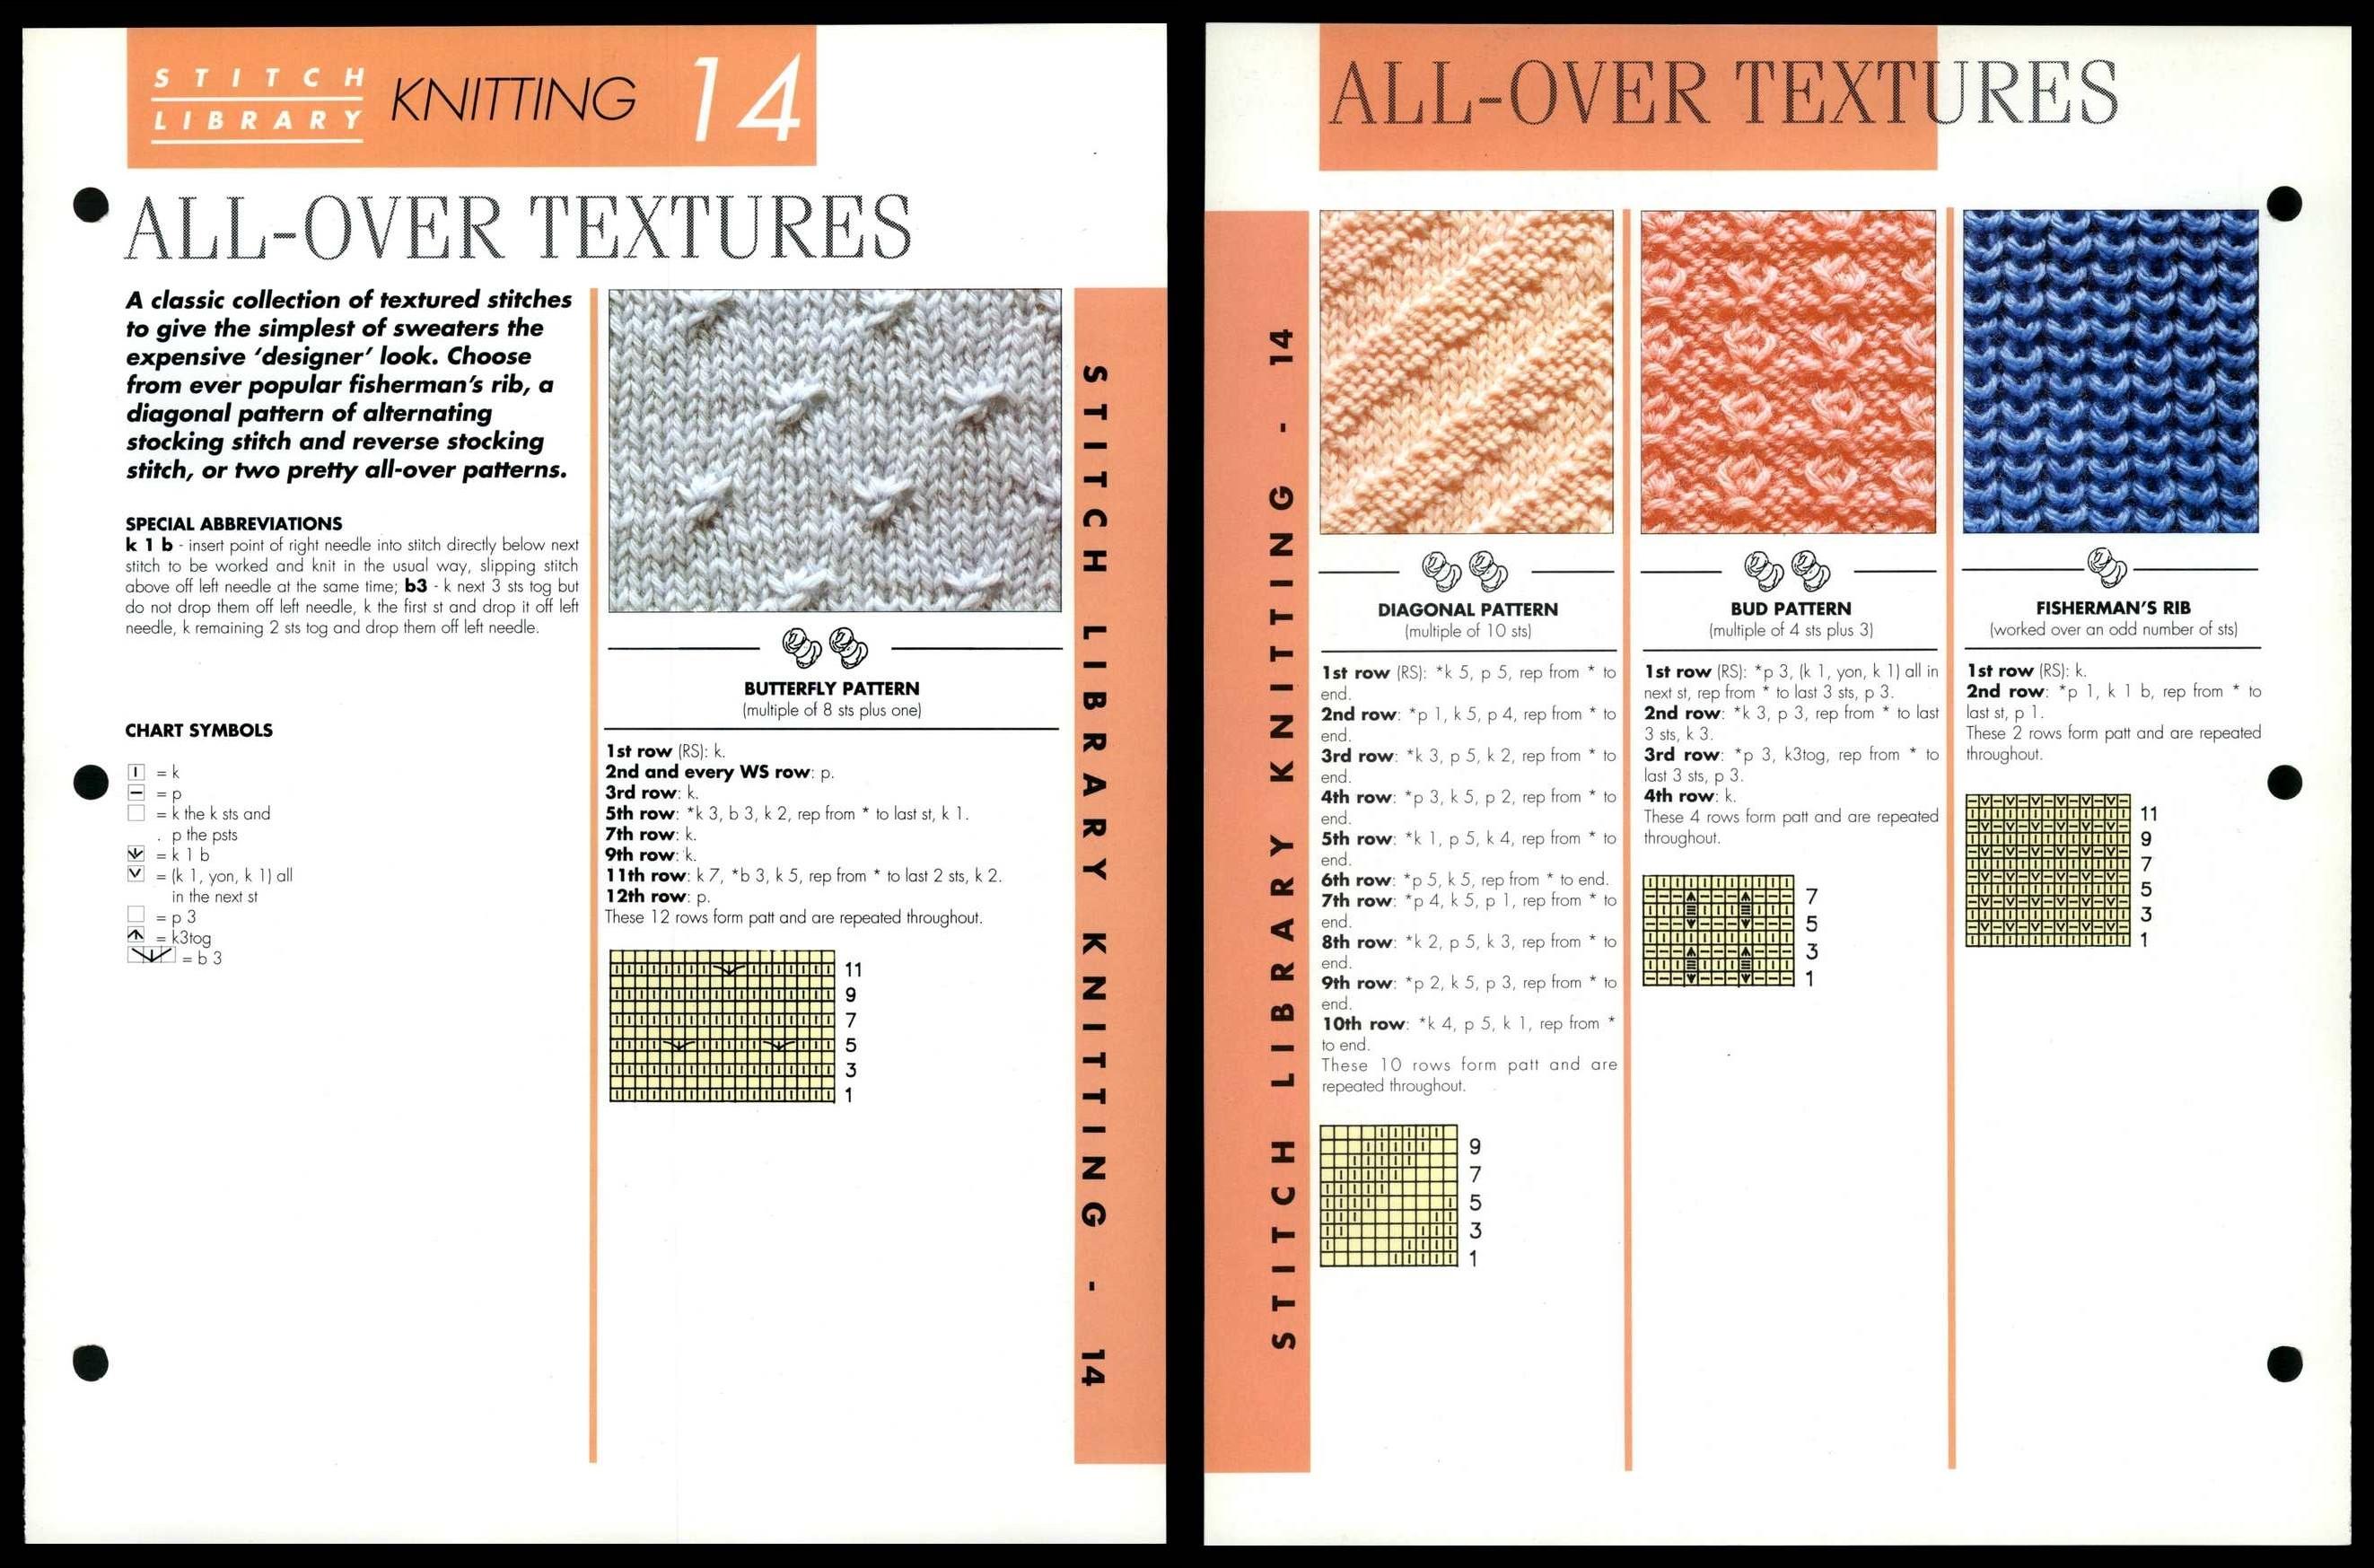 All-Over Textures #14 Creative Needles Stitch Library Knitting Pattern